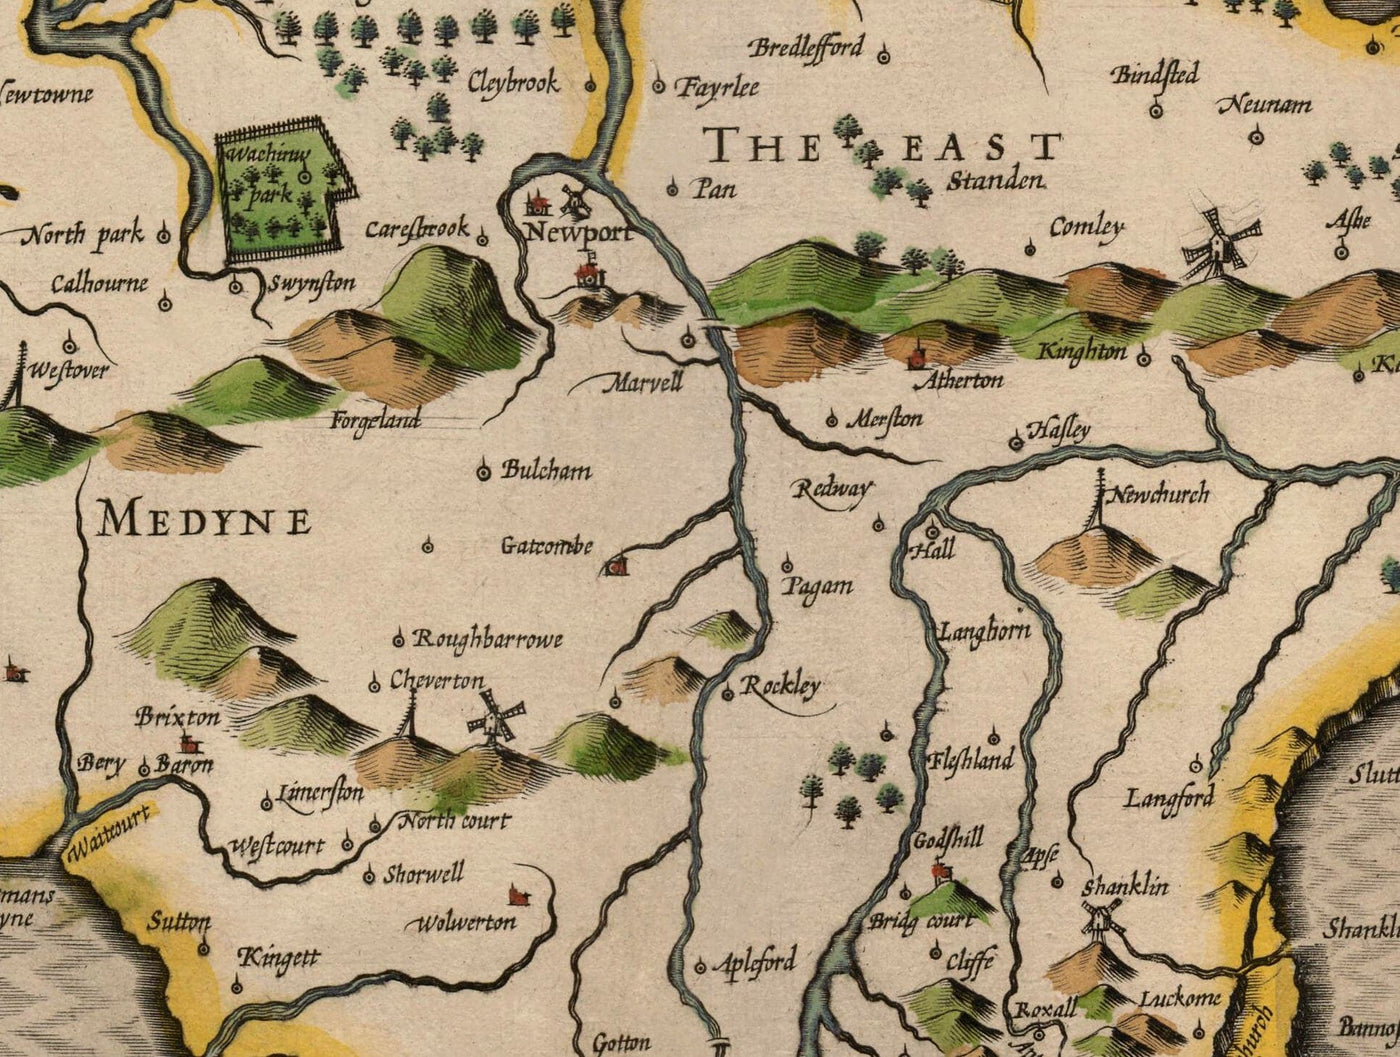 Old Map of Isle of Wight, 1611 by John Speed - Newport, Ride, Cowes, Sandown, Shanklin